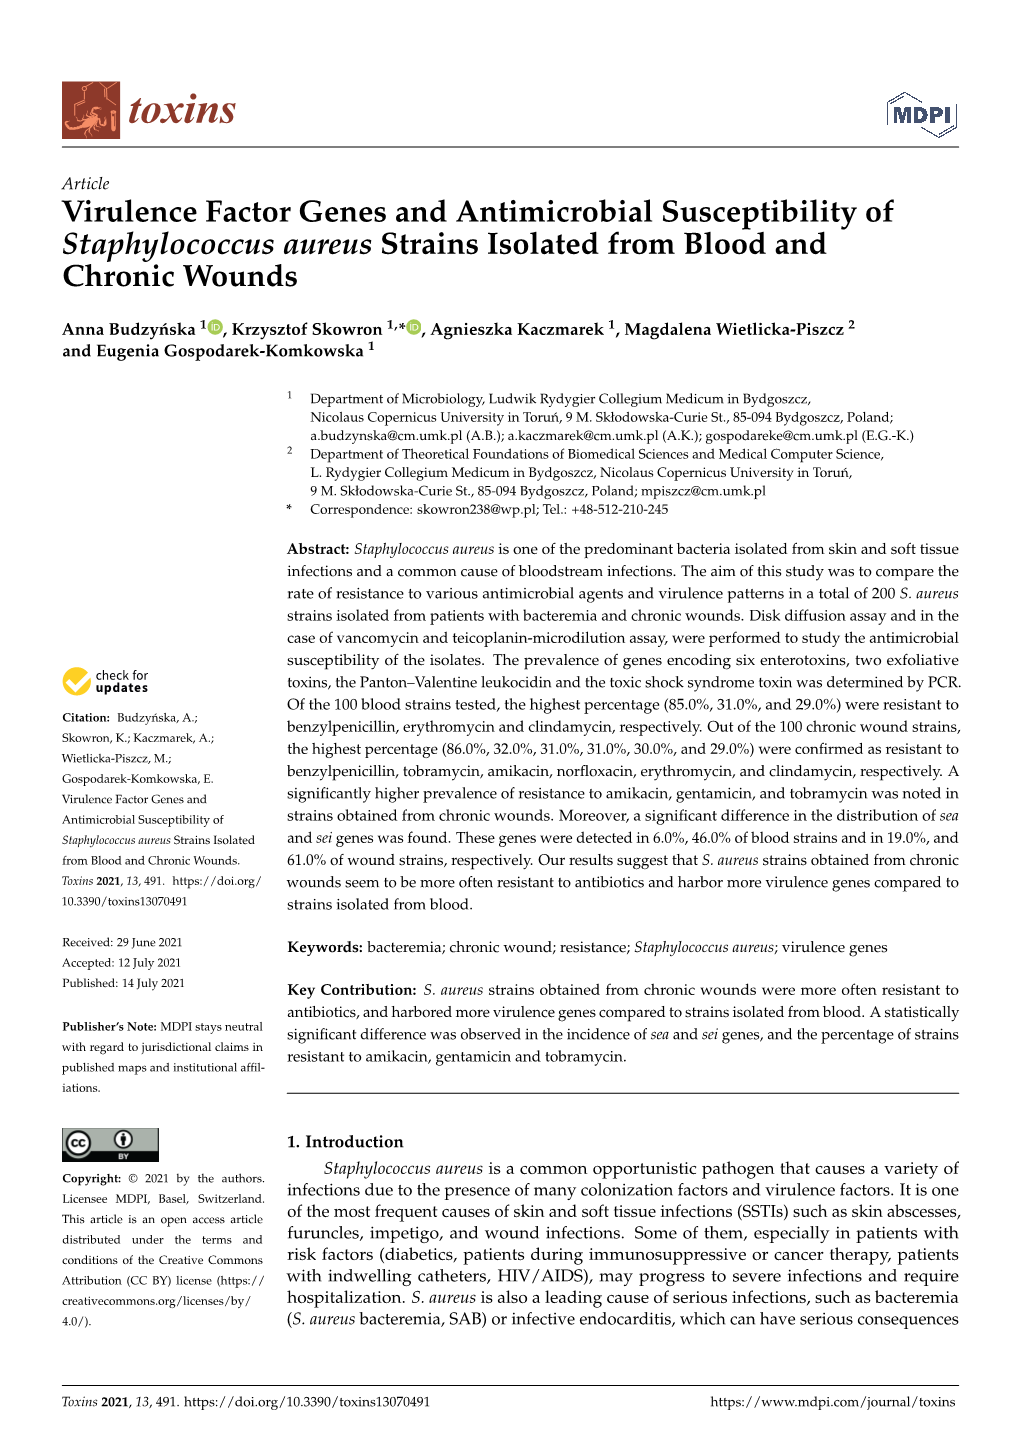 Virulence Factor Genes and Antimicrobial Susceptibility of Staphylococcus Aureus Strains Isolated from Blood and Chronic Wounds